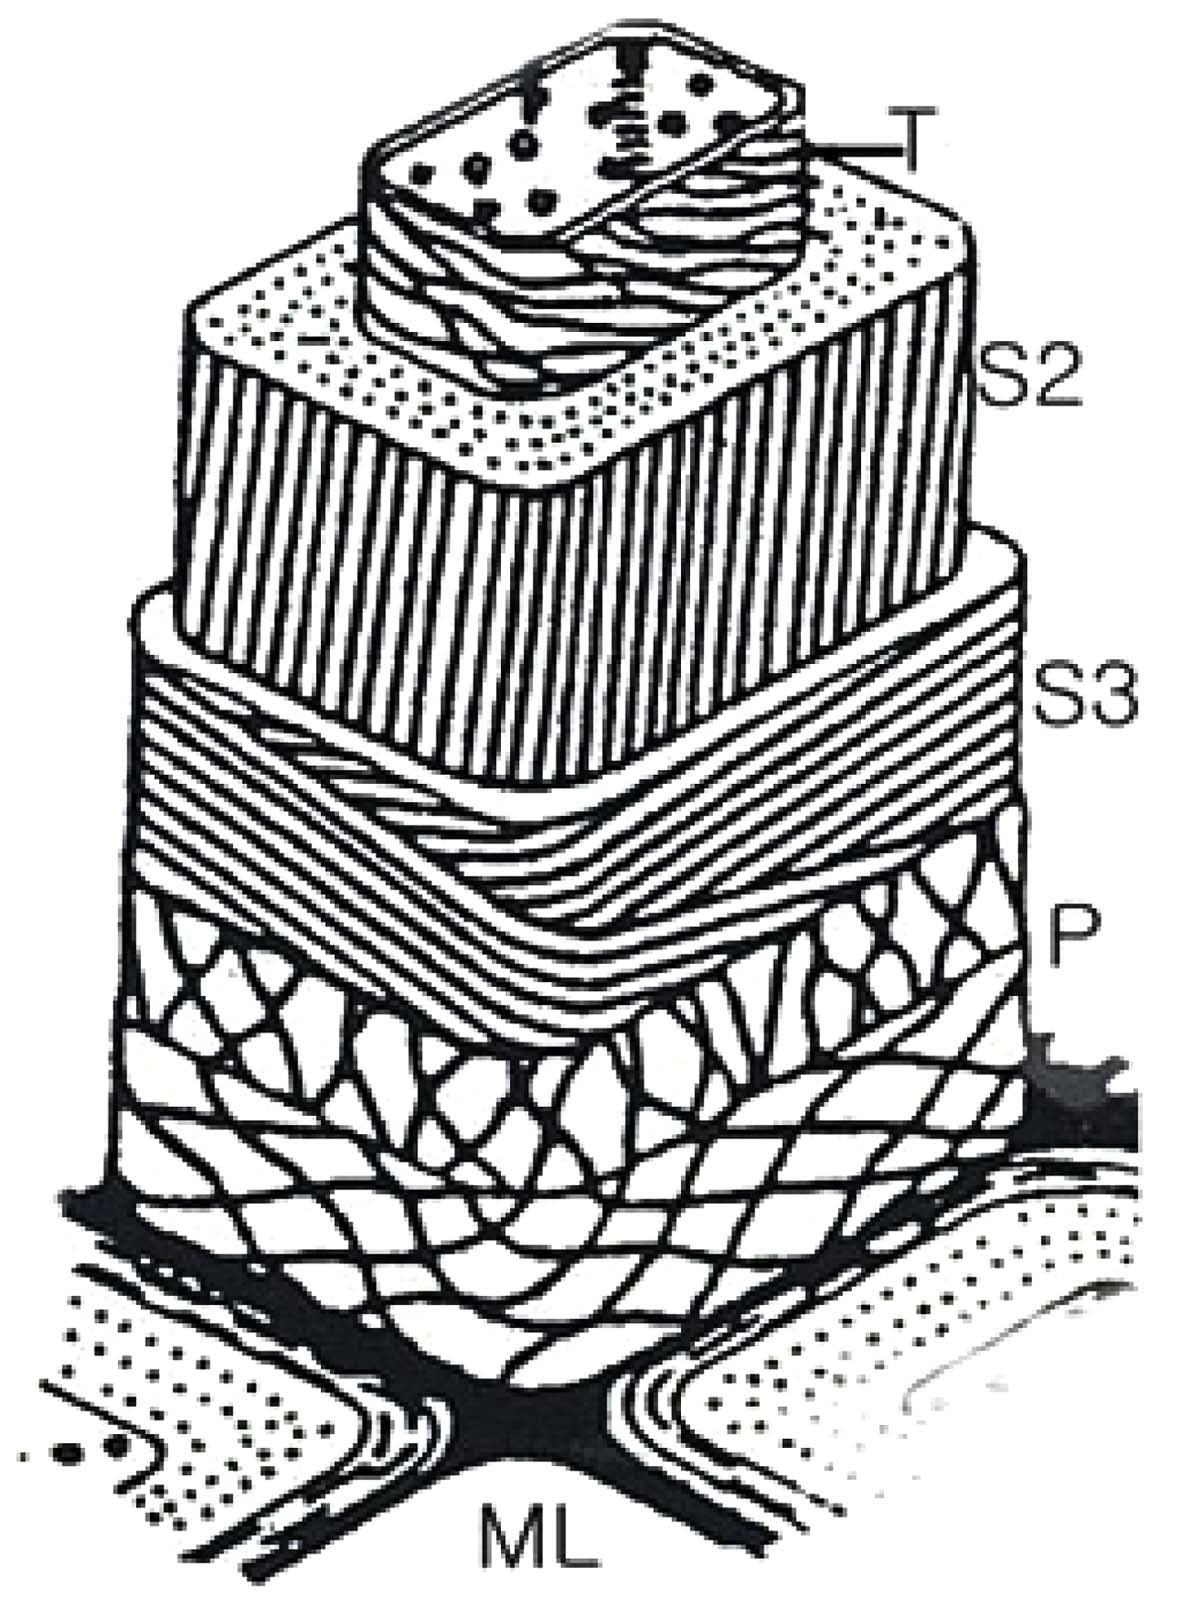 Scheme of the morphological architecture of ramie fiber; MLmiddle lamella(mainly lignin), P-primary wall, S-secondary wall, Ttertiary wall. Klemm et al. (1998), p.25.